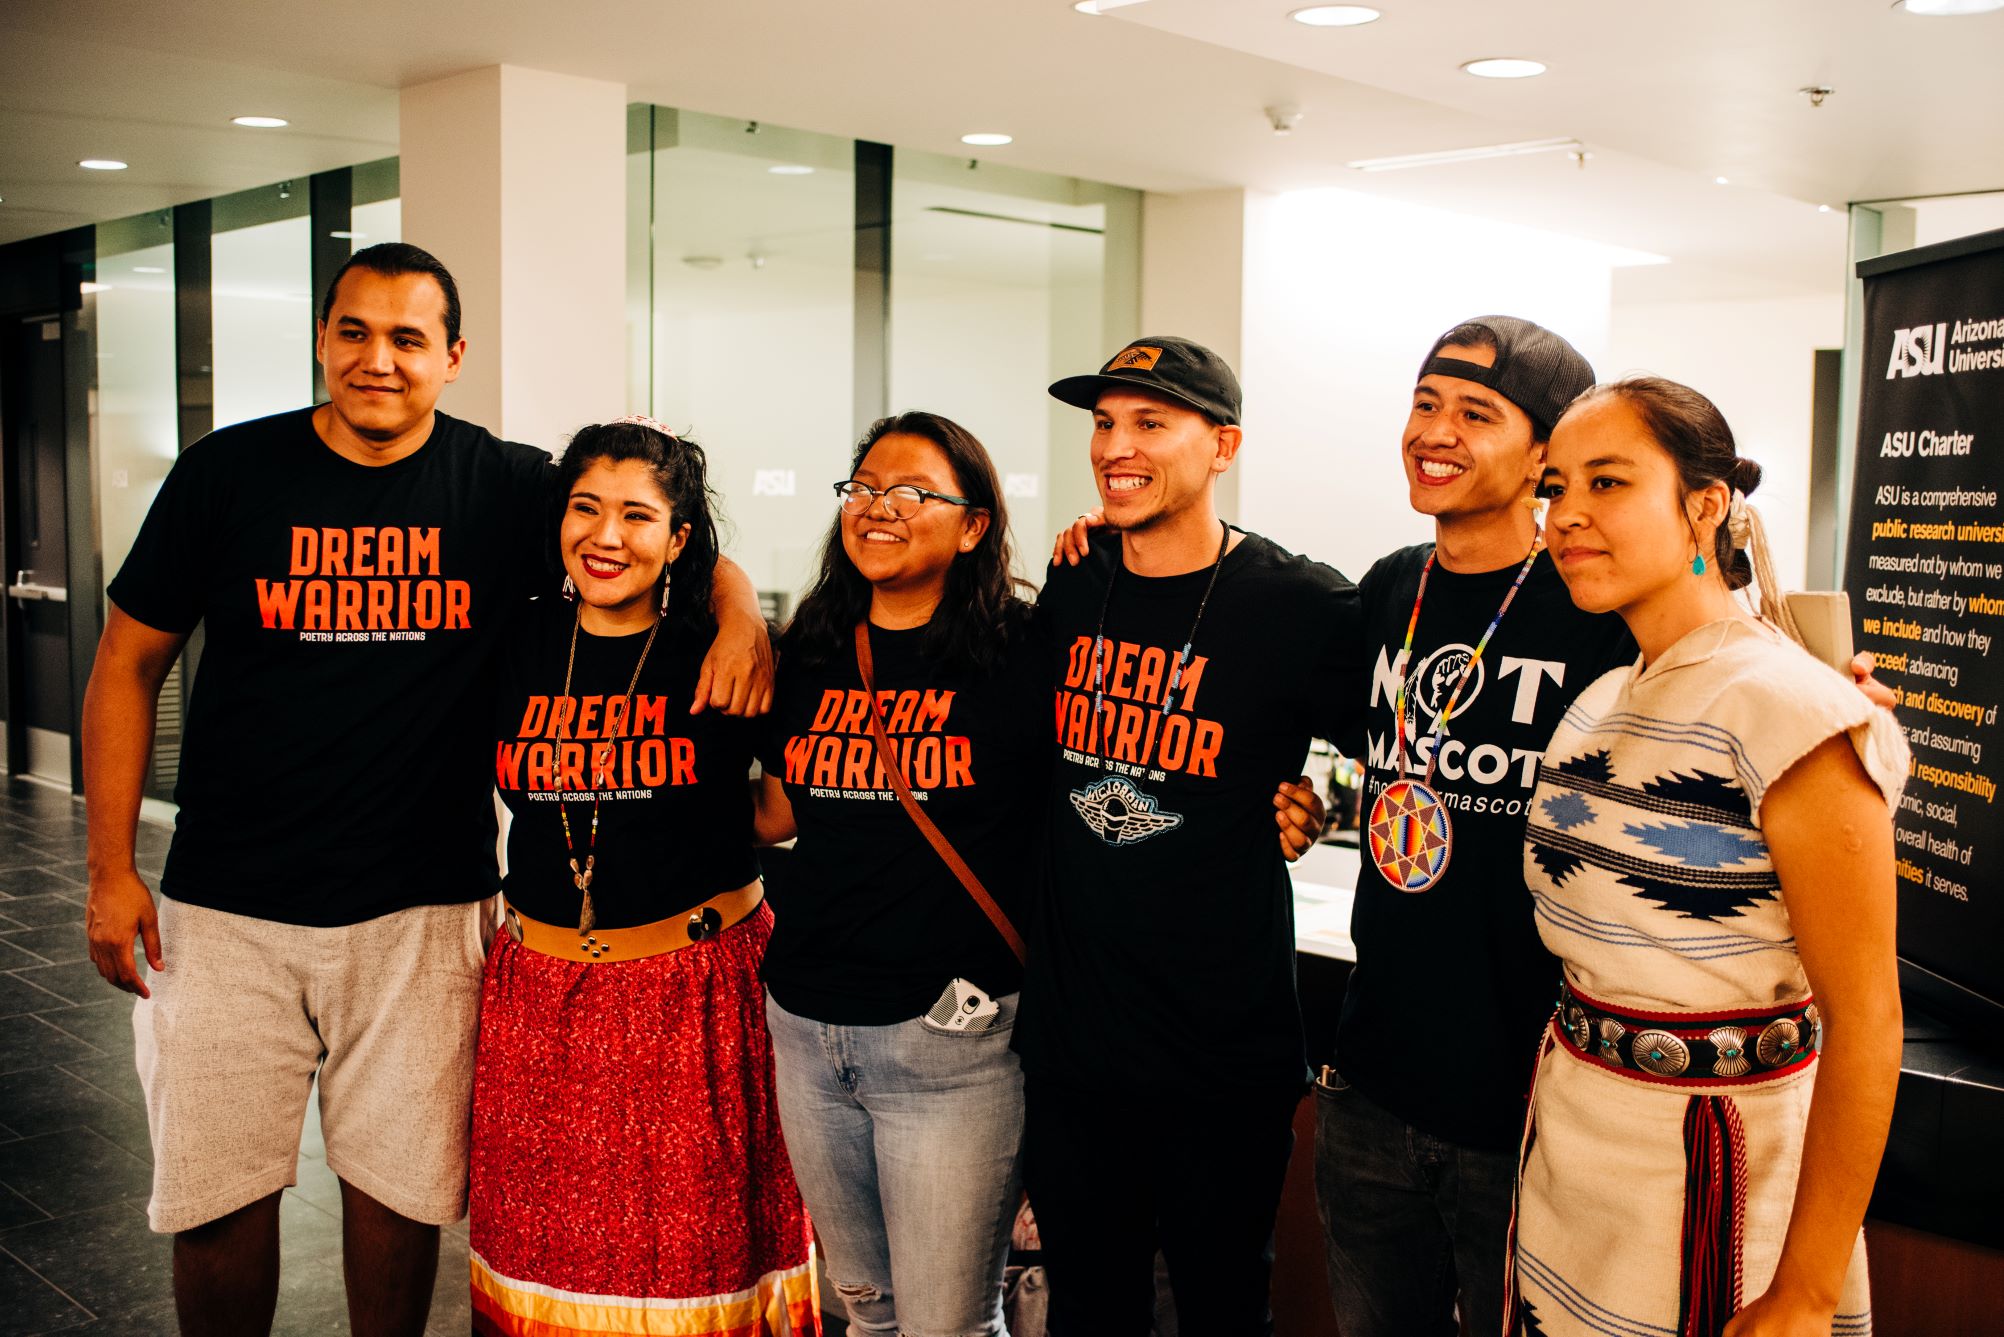 Indigenous students standing in community, celebrating.  